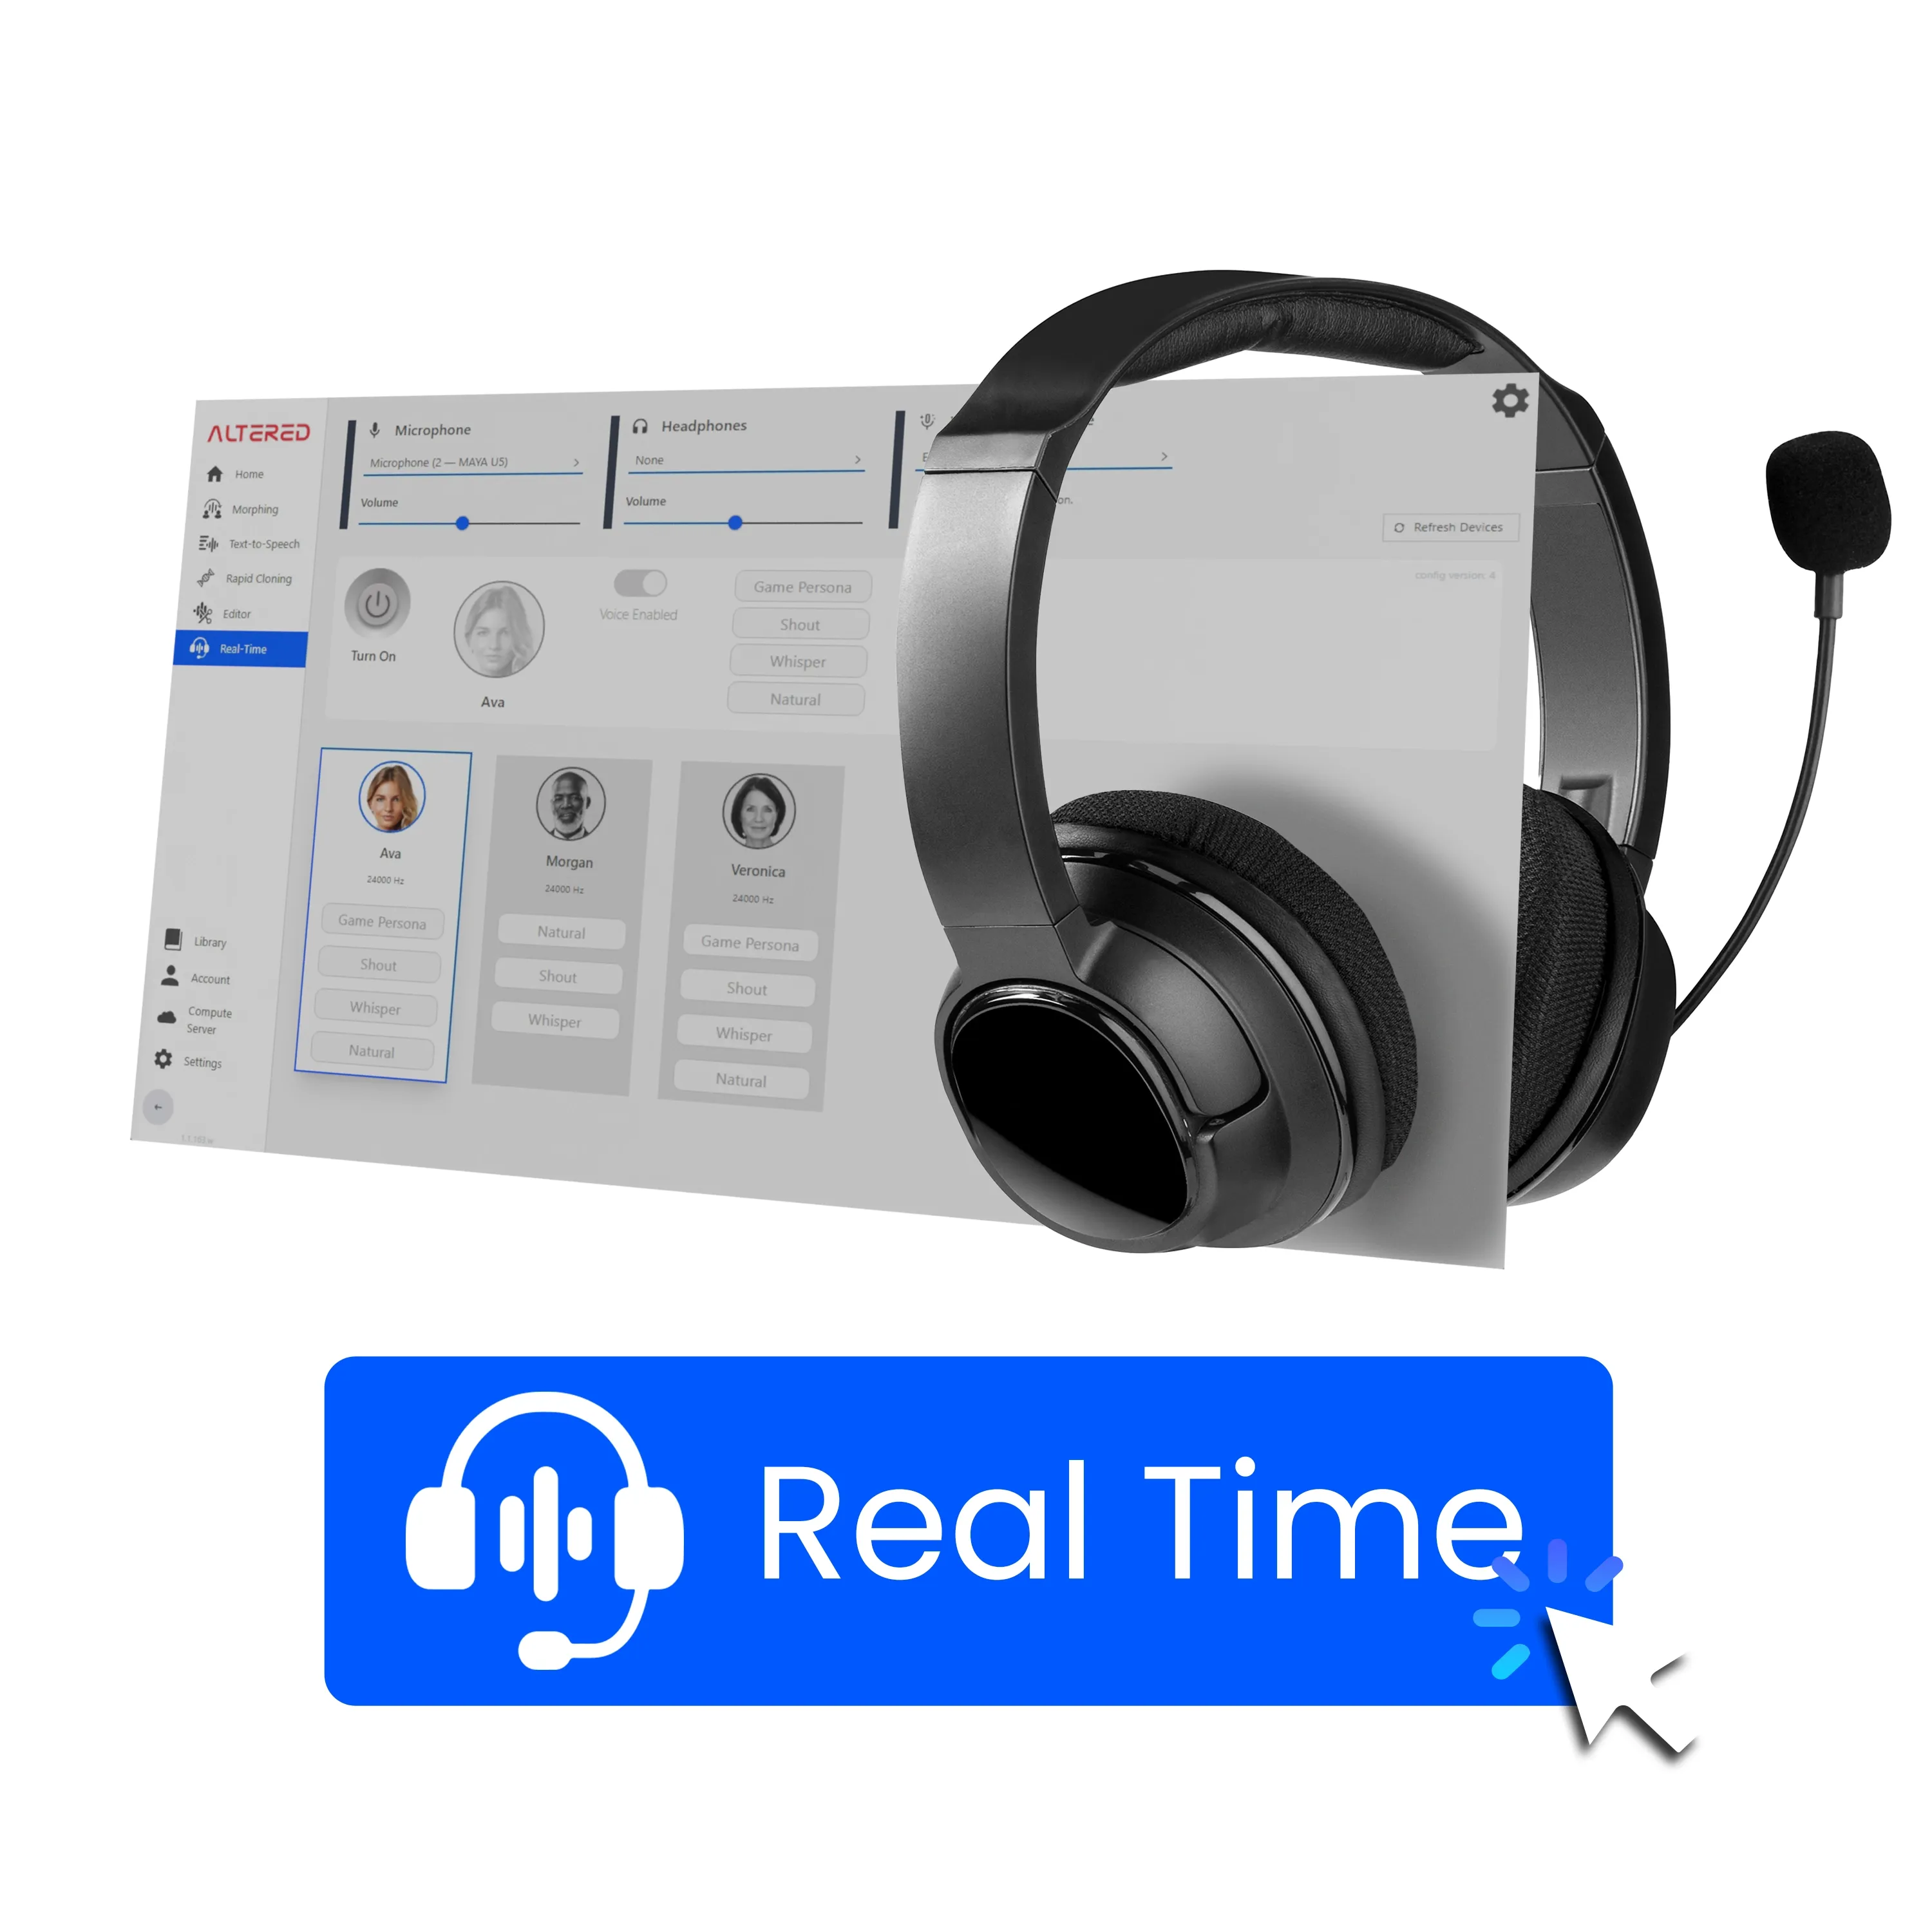 Altered Studio realtime voice changer UI with an headset